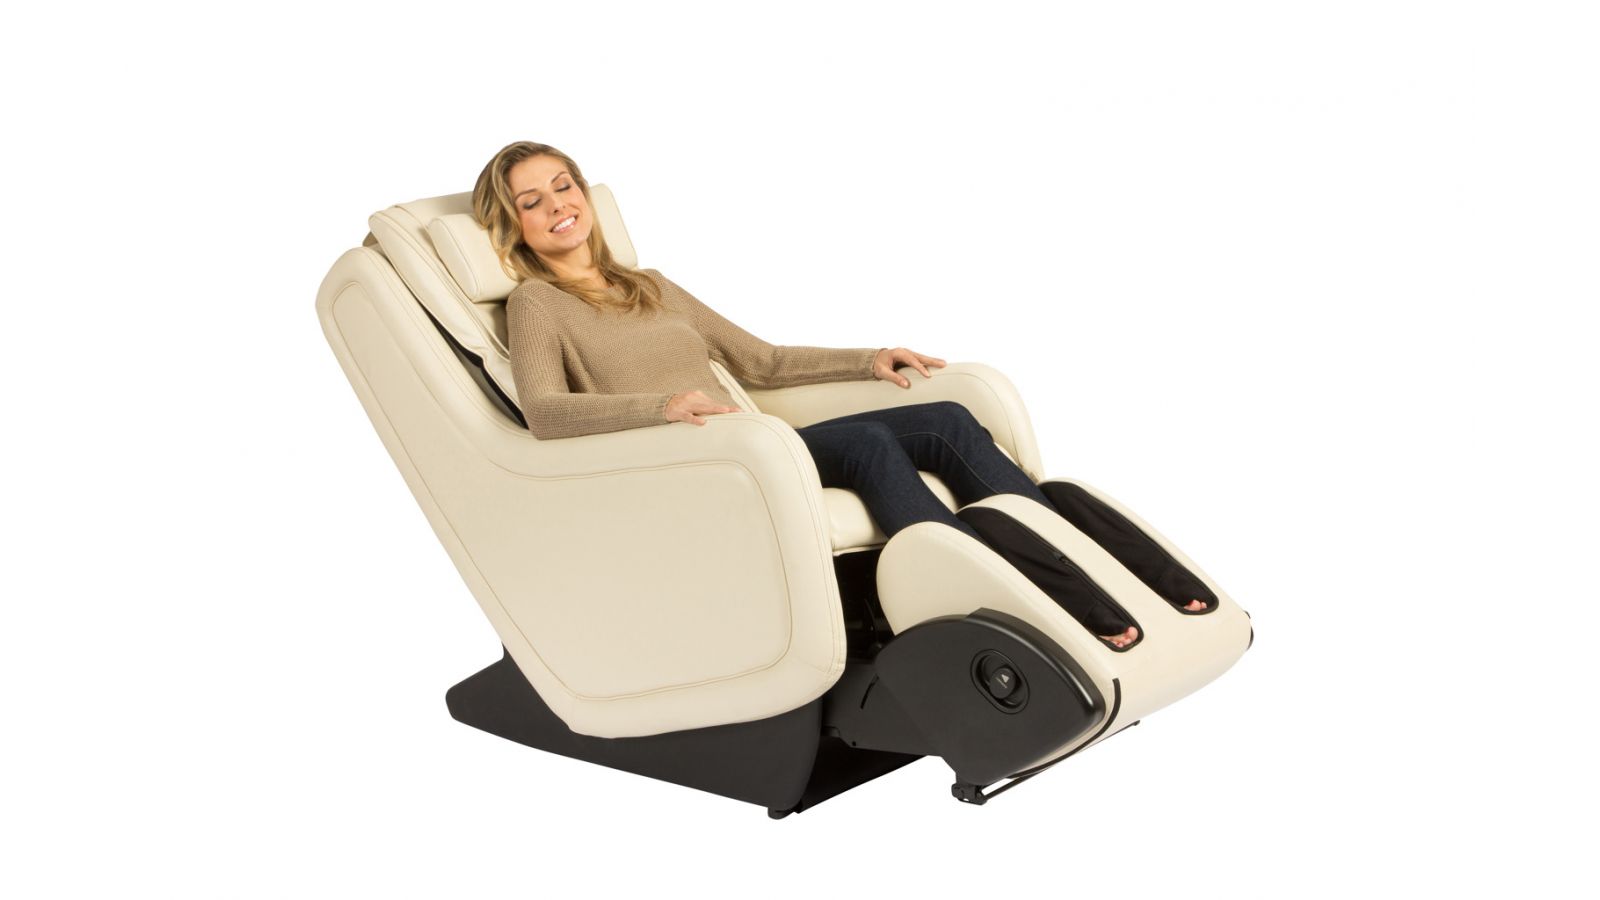 Human Touch Immersion Seating ZeroG 4.0 Massage Chair